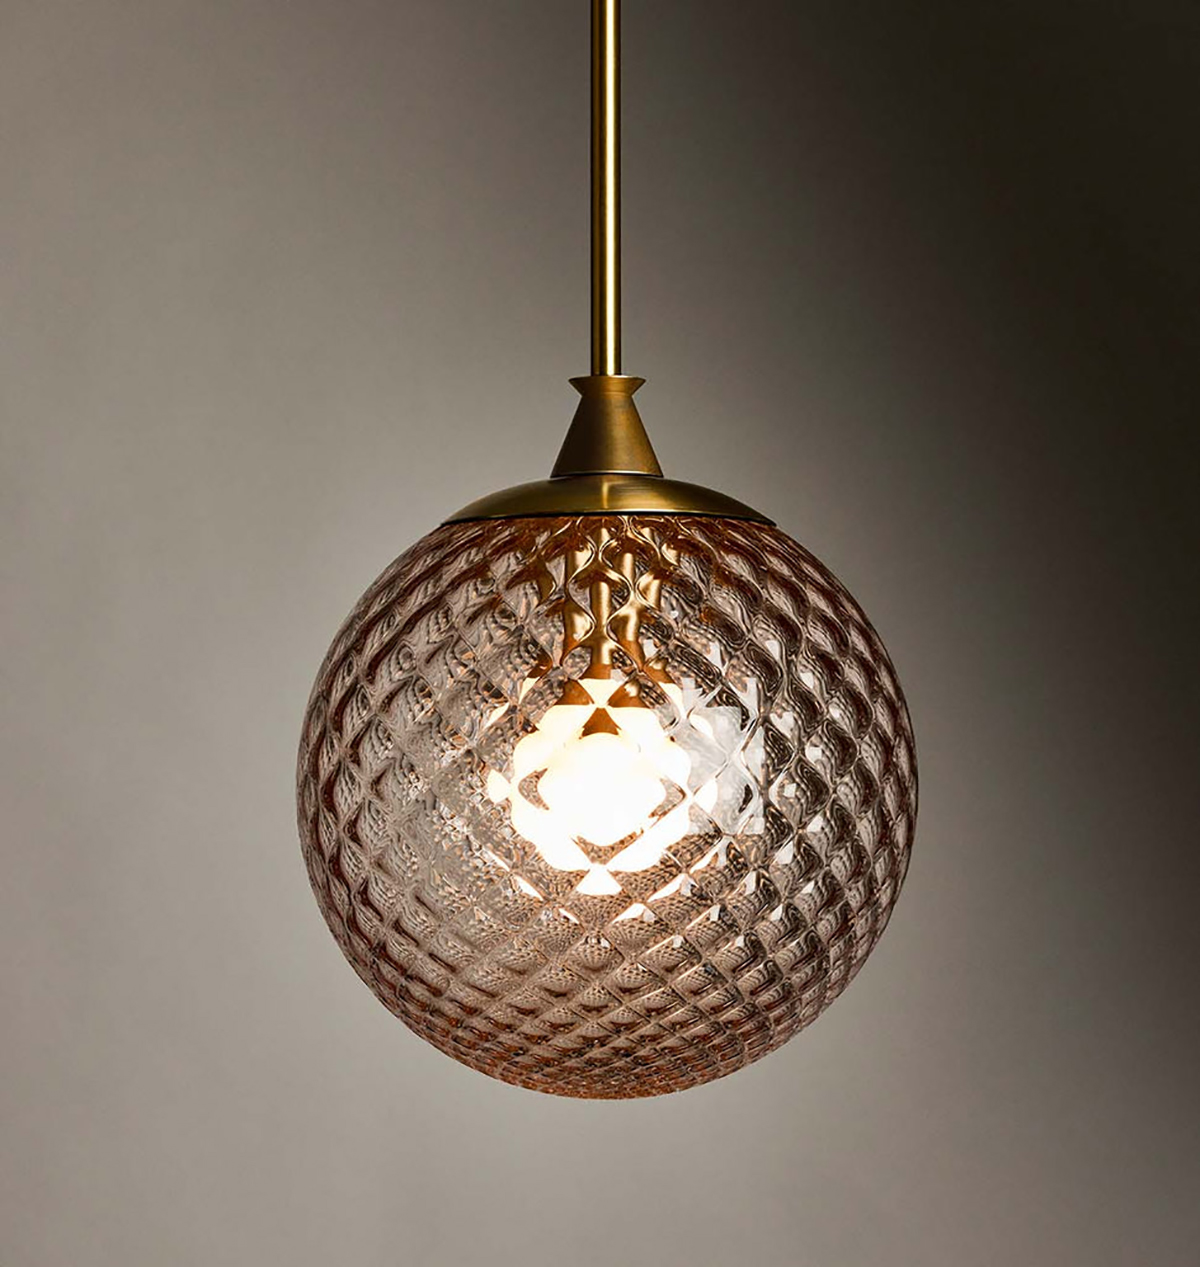 THE ROLL AND HILL PENDANT 02 GLOBE par Roll & Hill